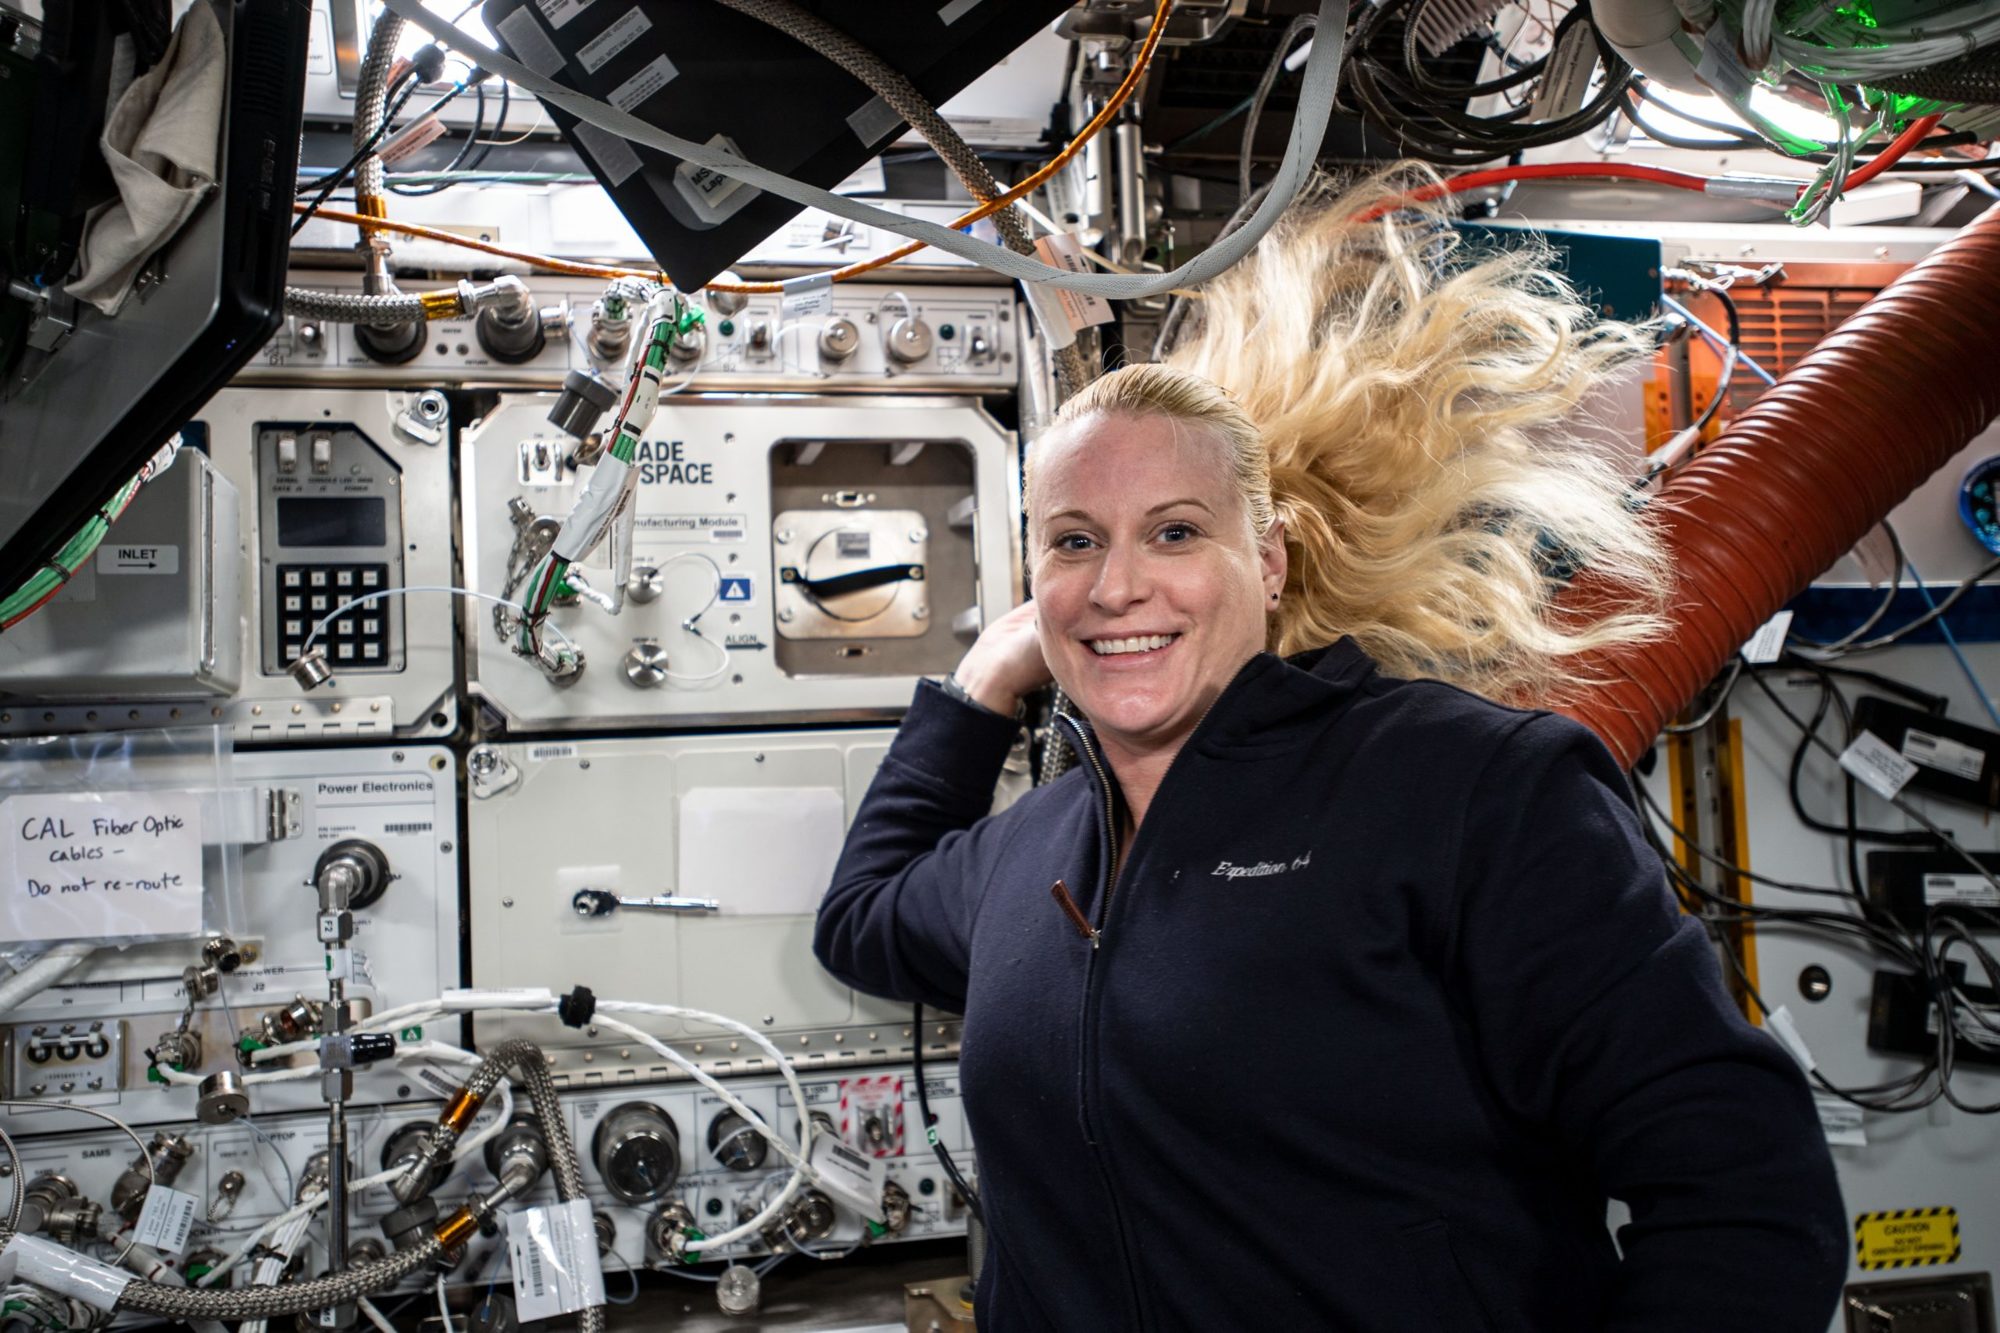 NASA engineer Kate Rubins with a 3D printer made by Made In Space, now named Redwire, aboard in International Space Station.